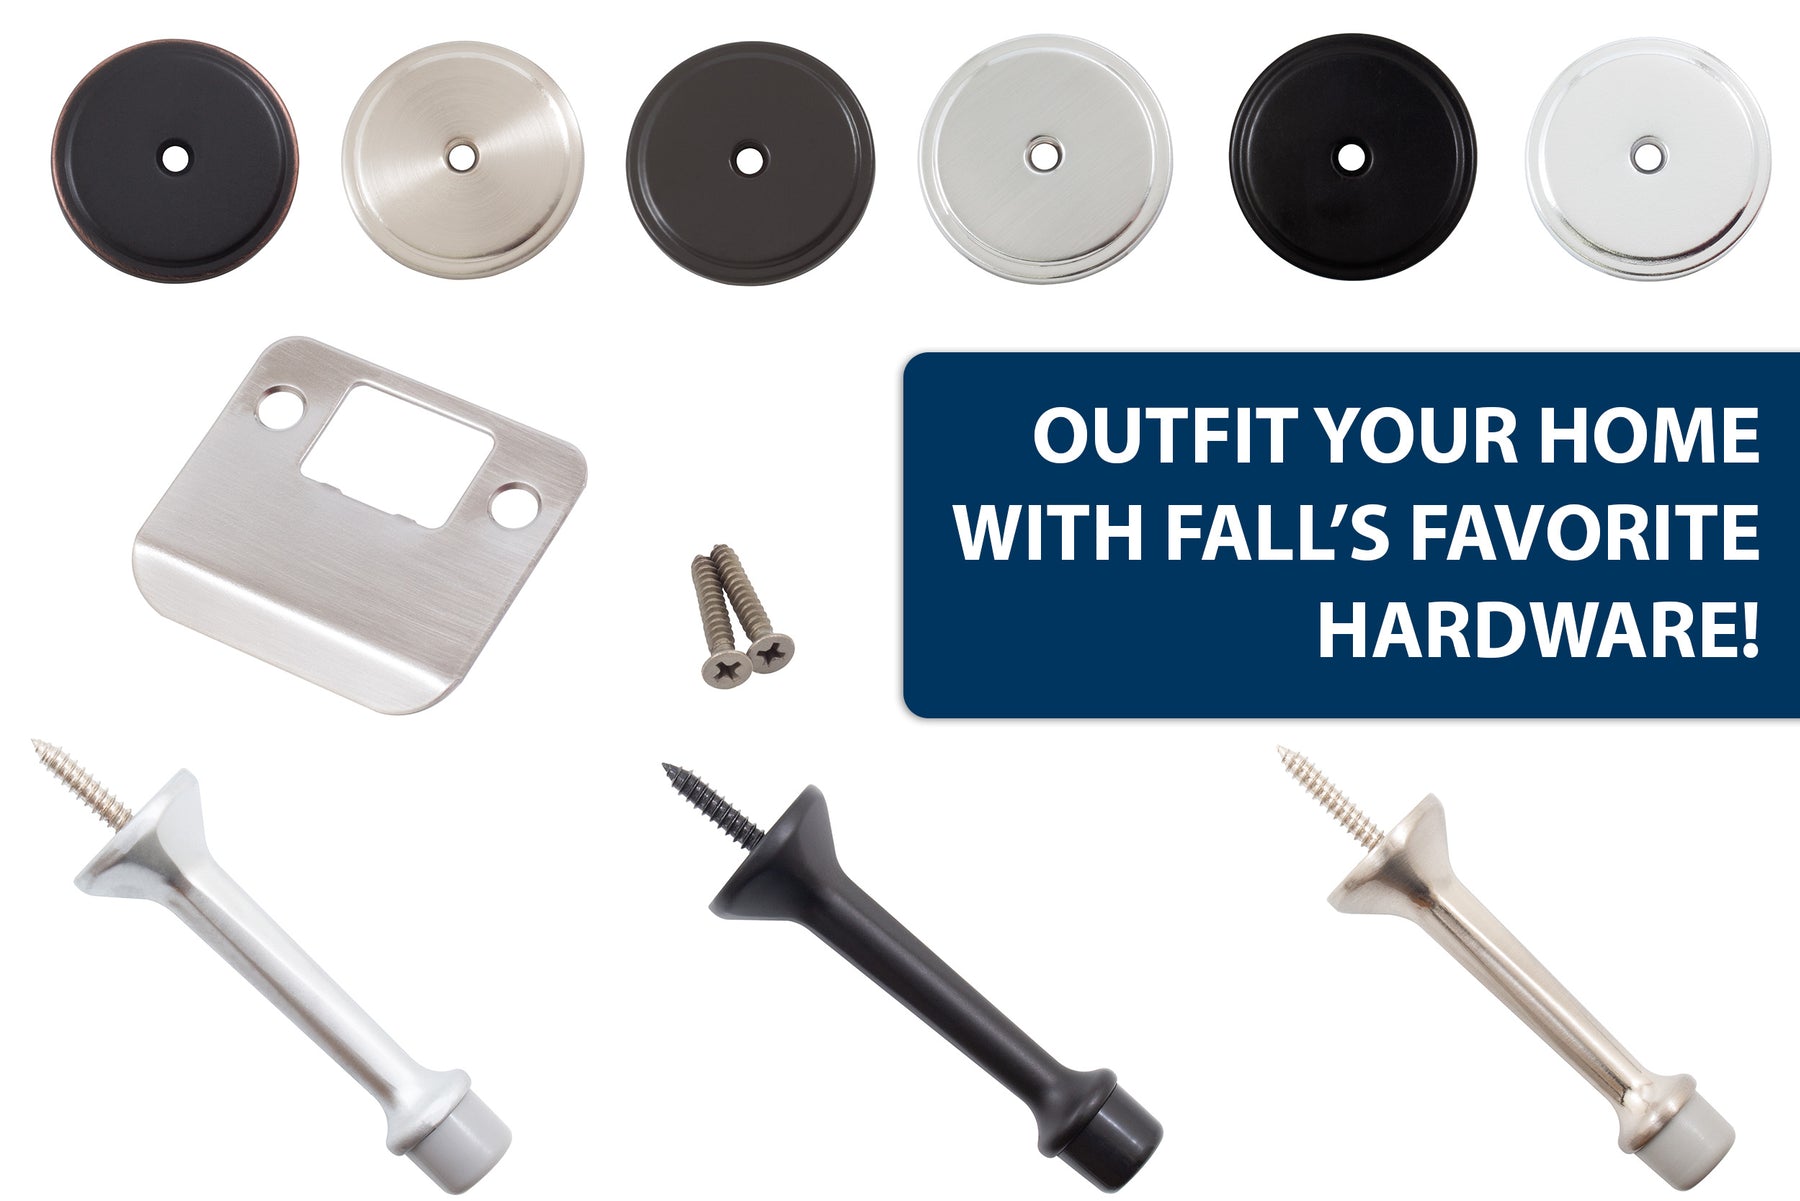 Embrace Autumn Elegance: Unveiling Our Most Popular Hardware This Fall